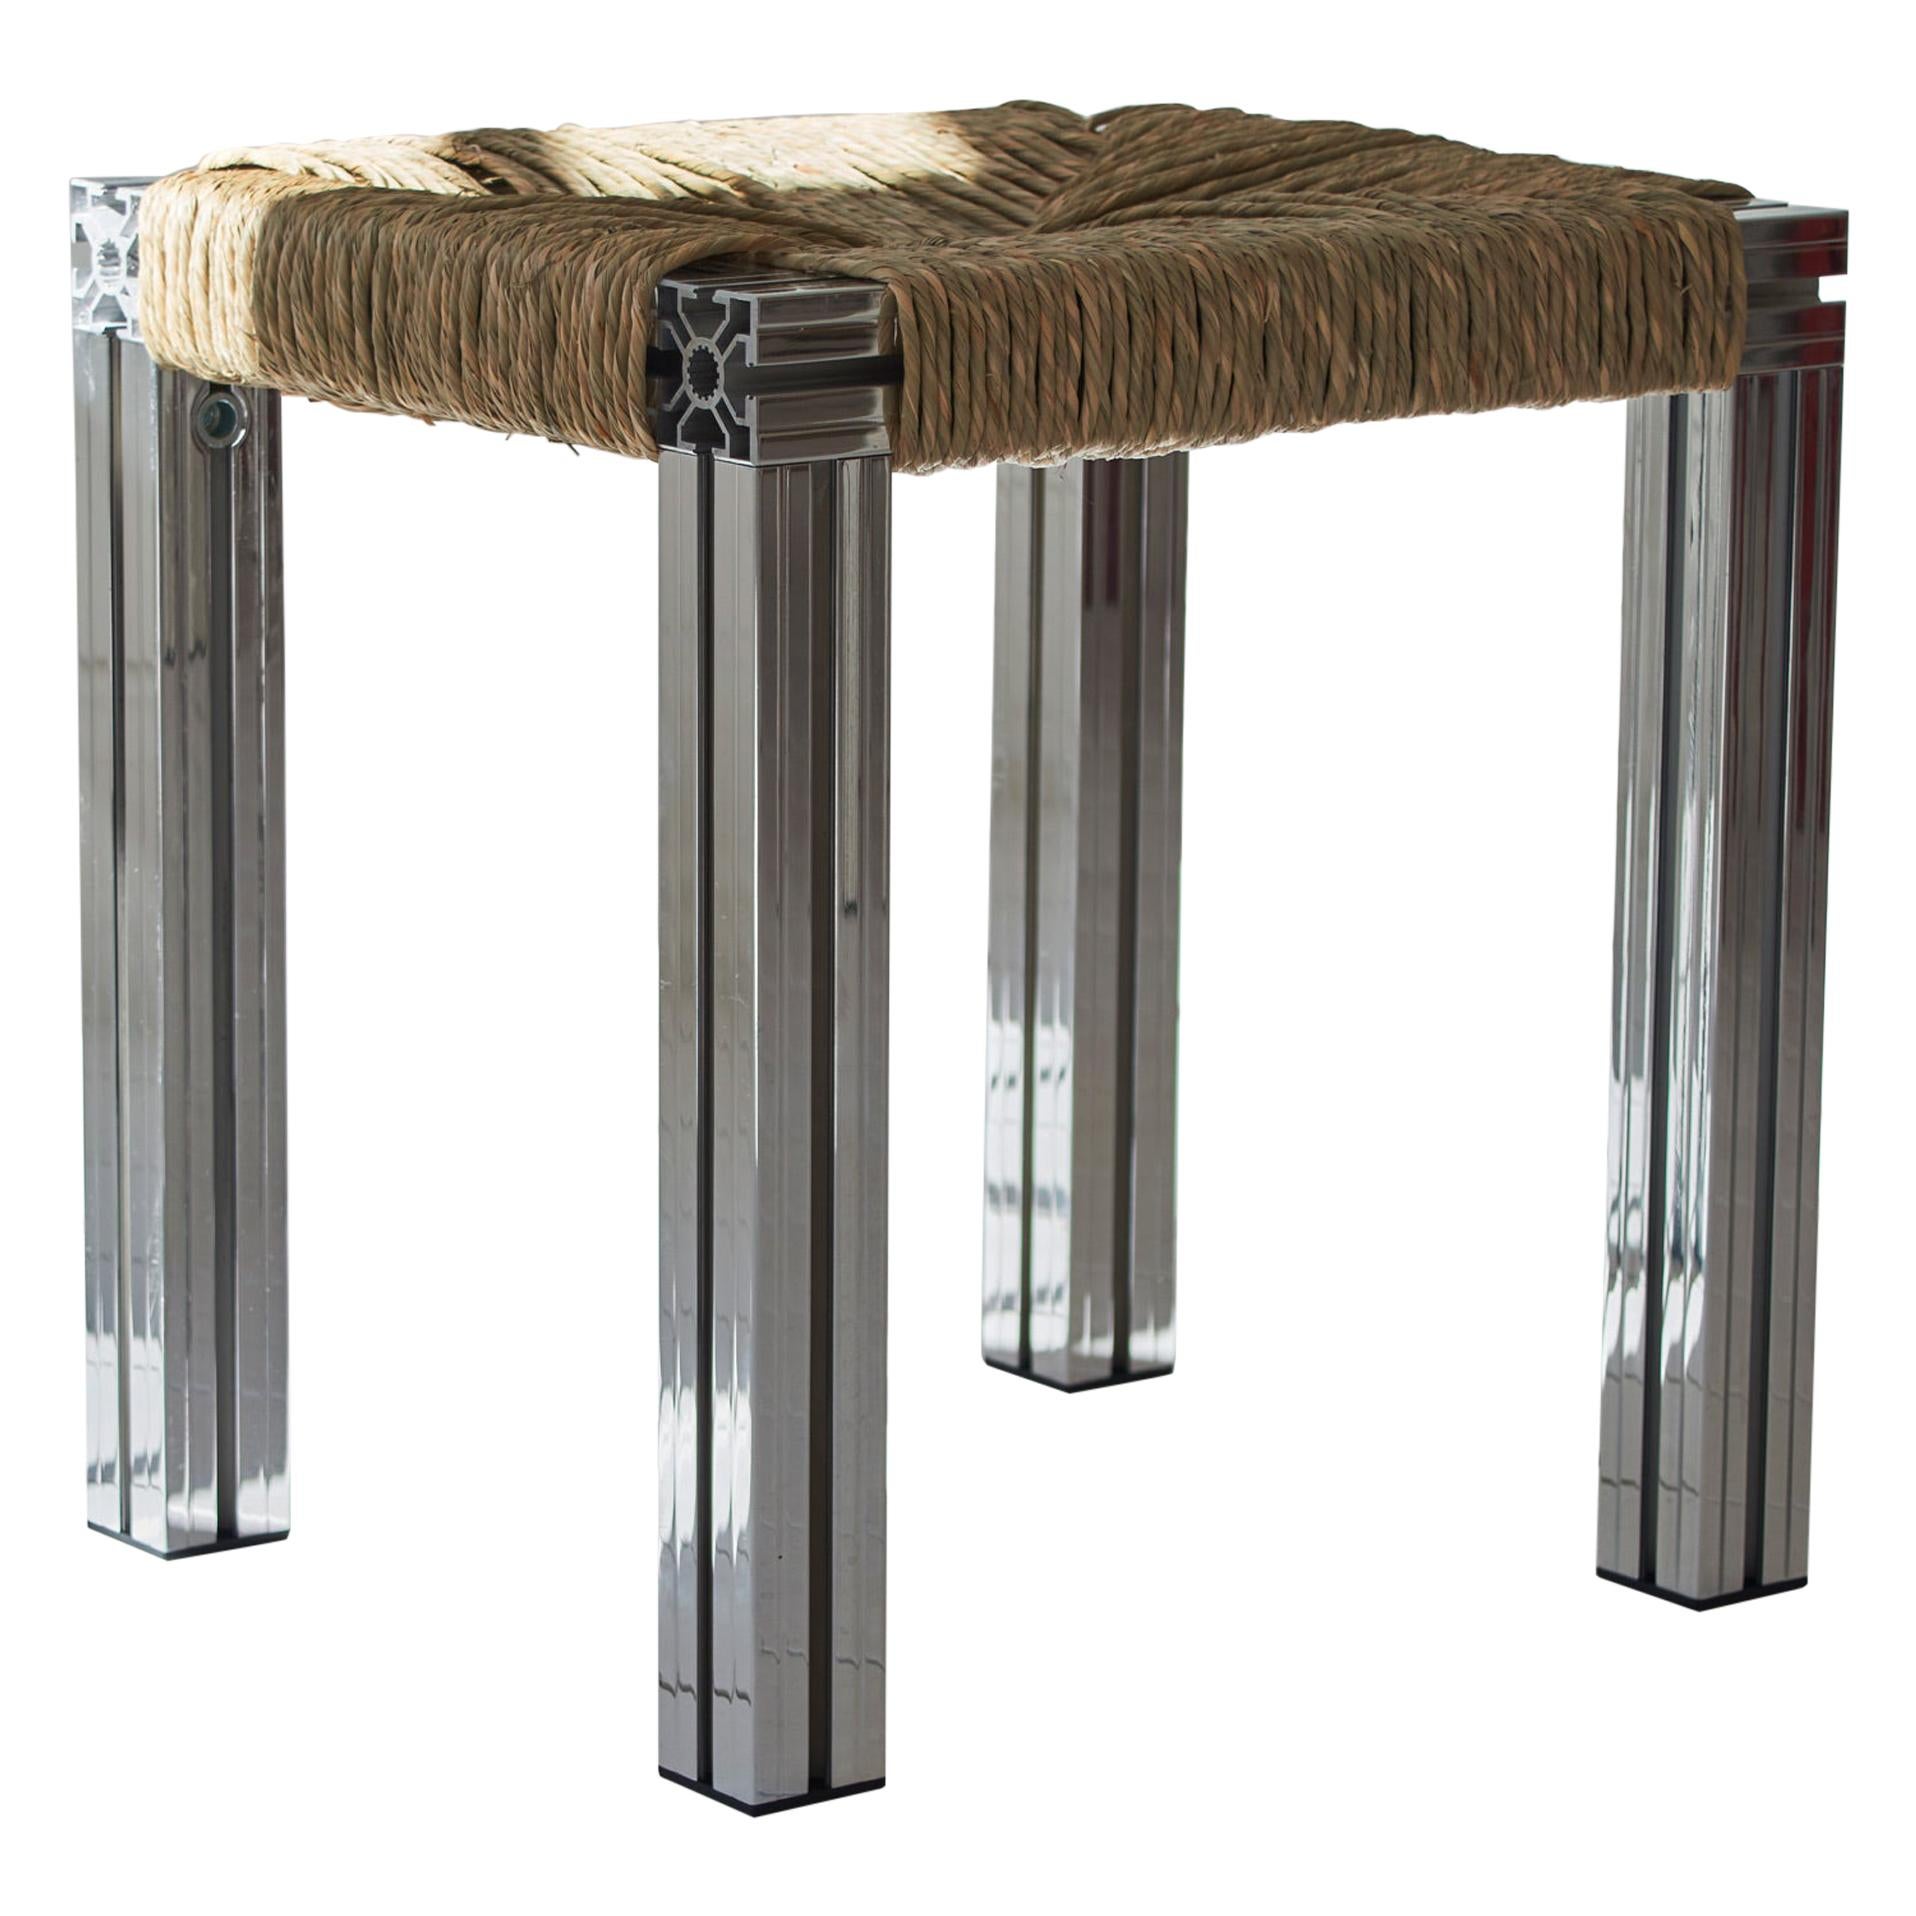 Polished Aluminium Stool with Reel Rush Seating from Anodised Wicker Collection For Sale